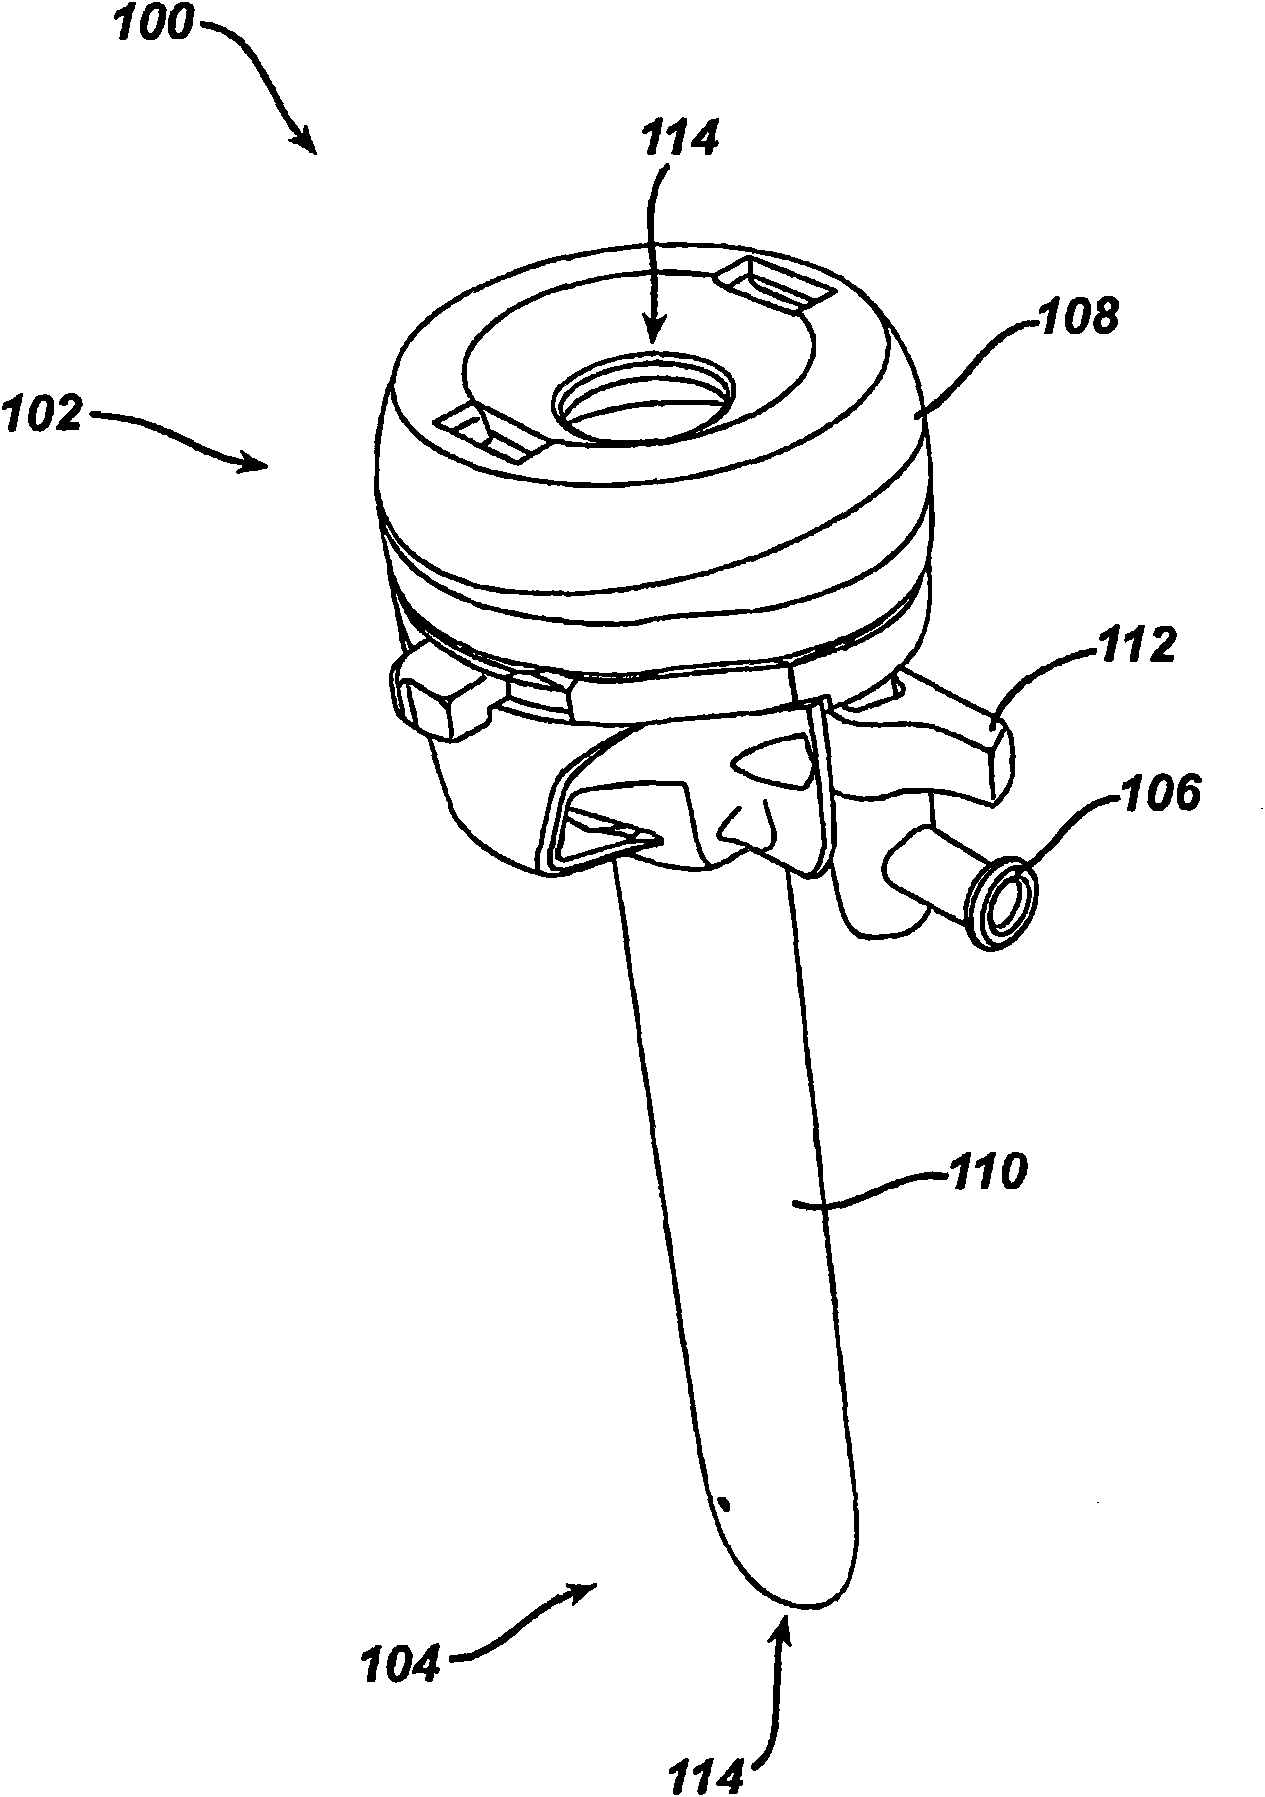 Gas jet fluid removing device and method in a trocar